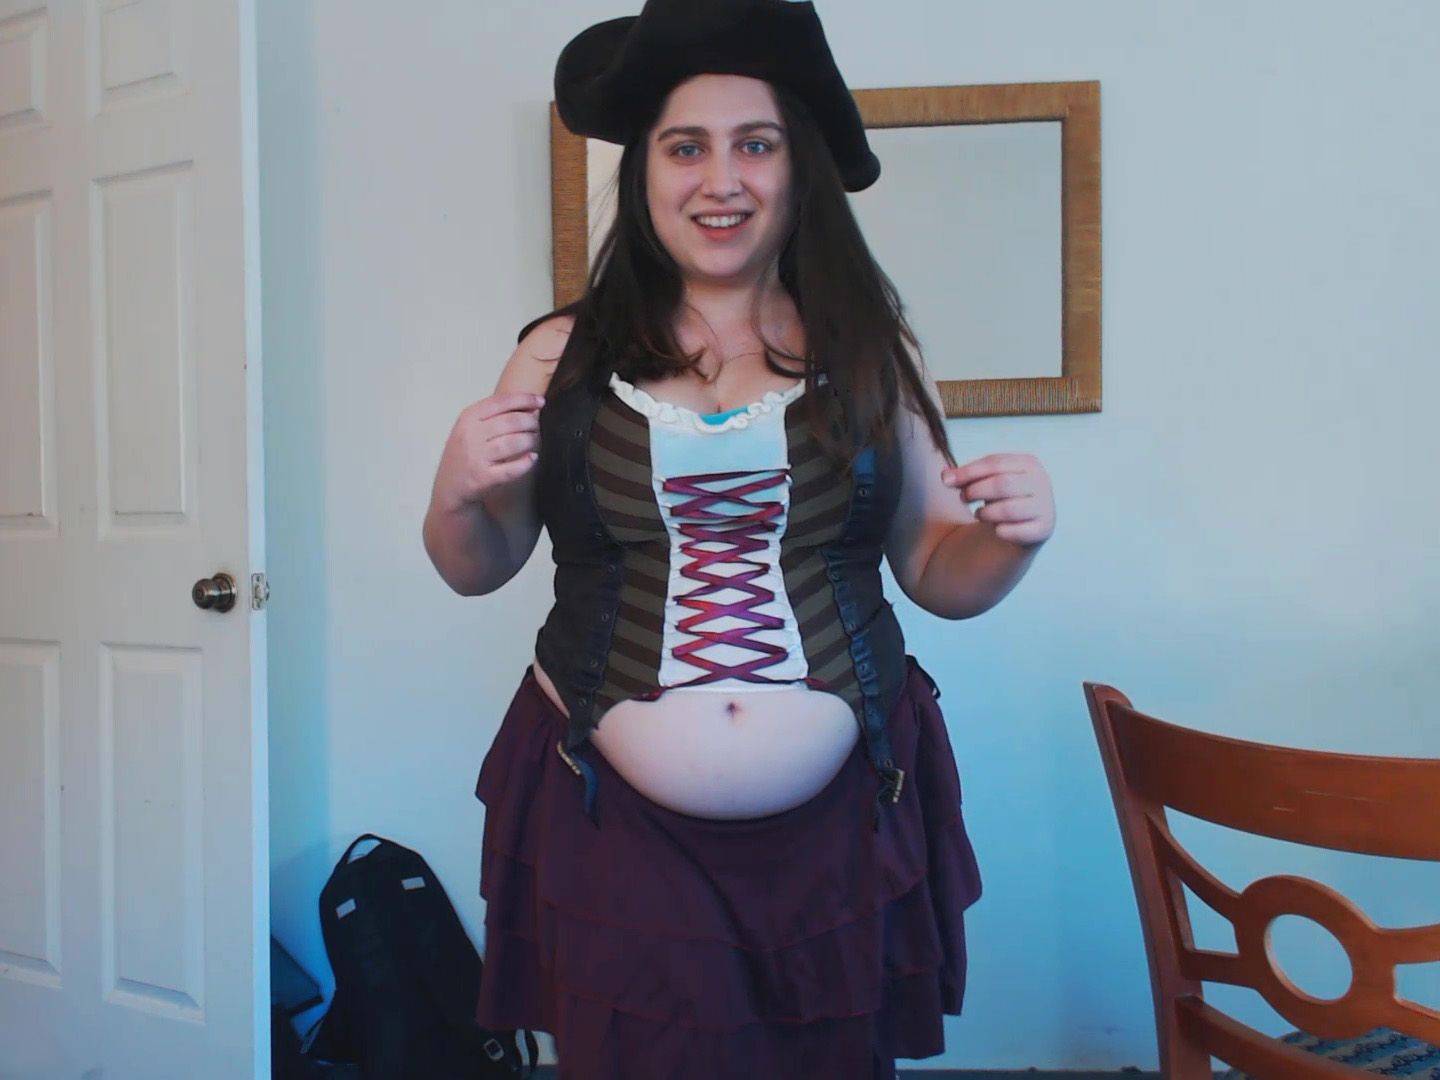 Chubby Pirate Cosplay